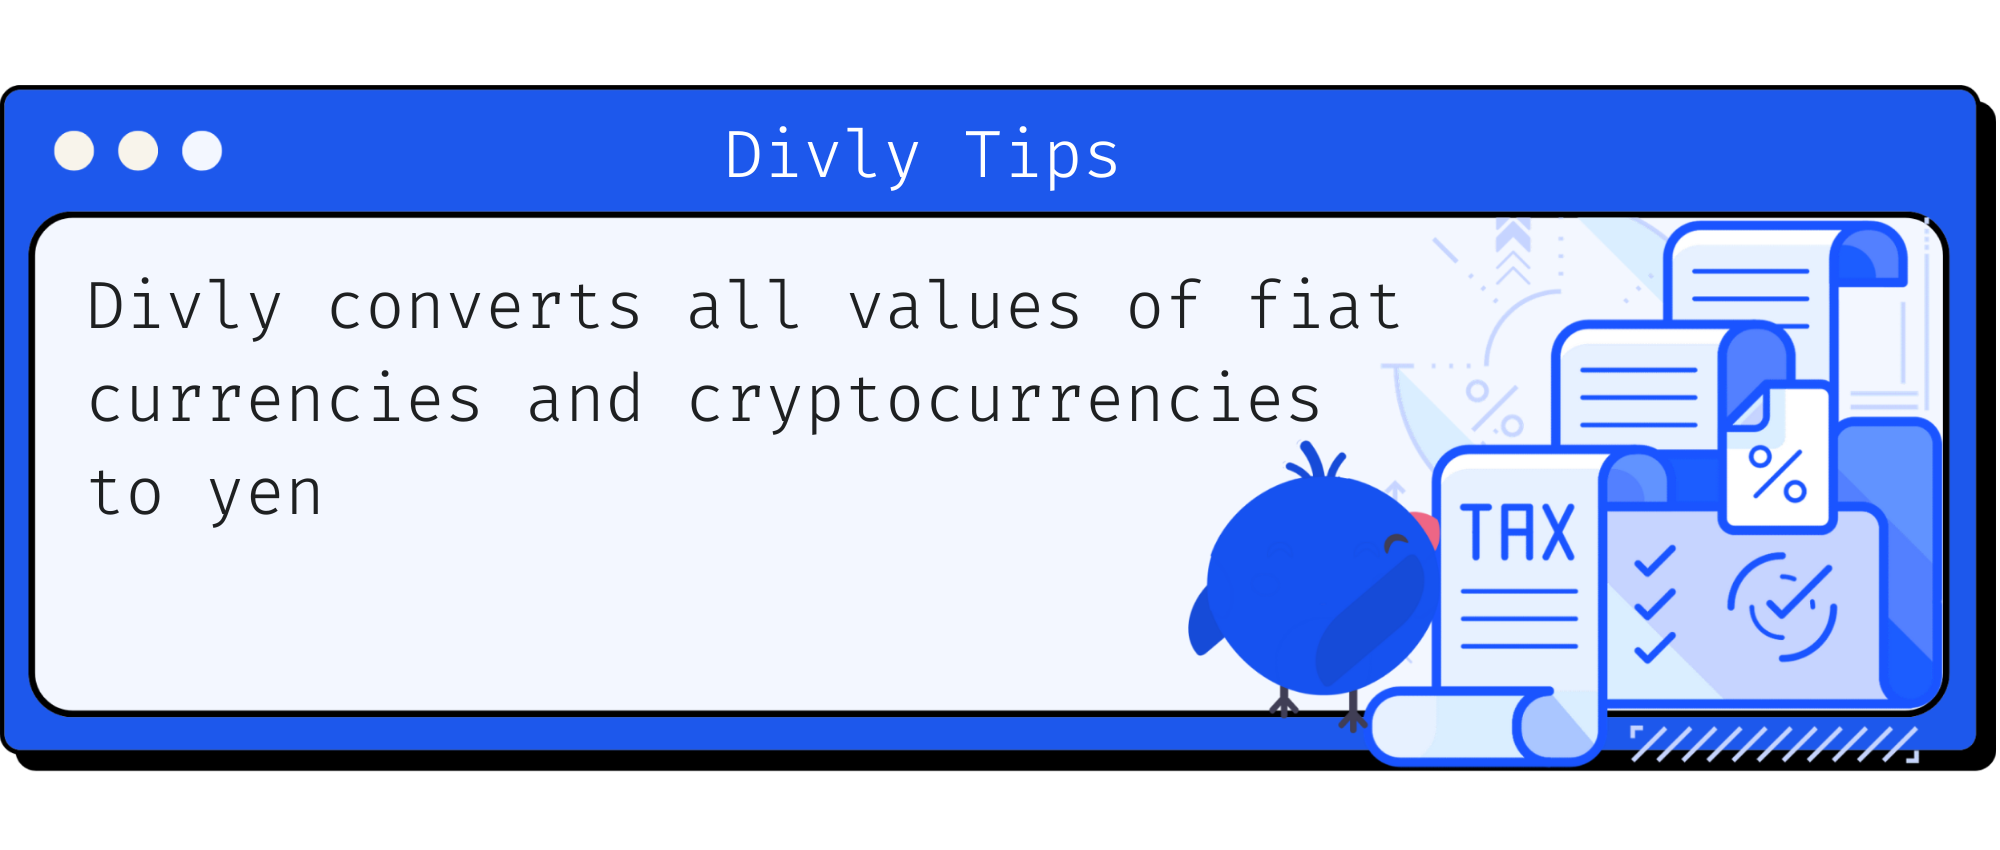 Divly converts all values of fiat currencies and cryptocurrencies to yen